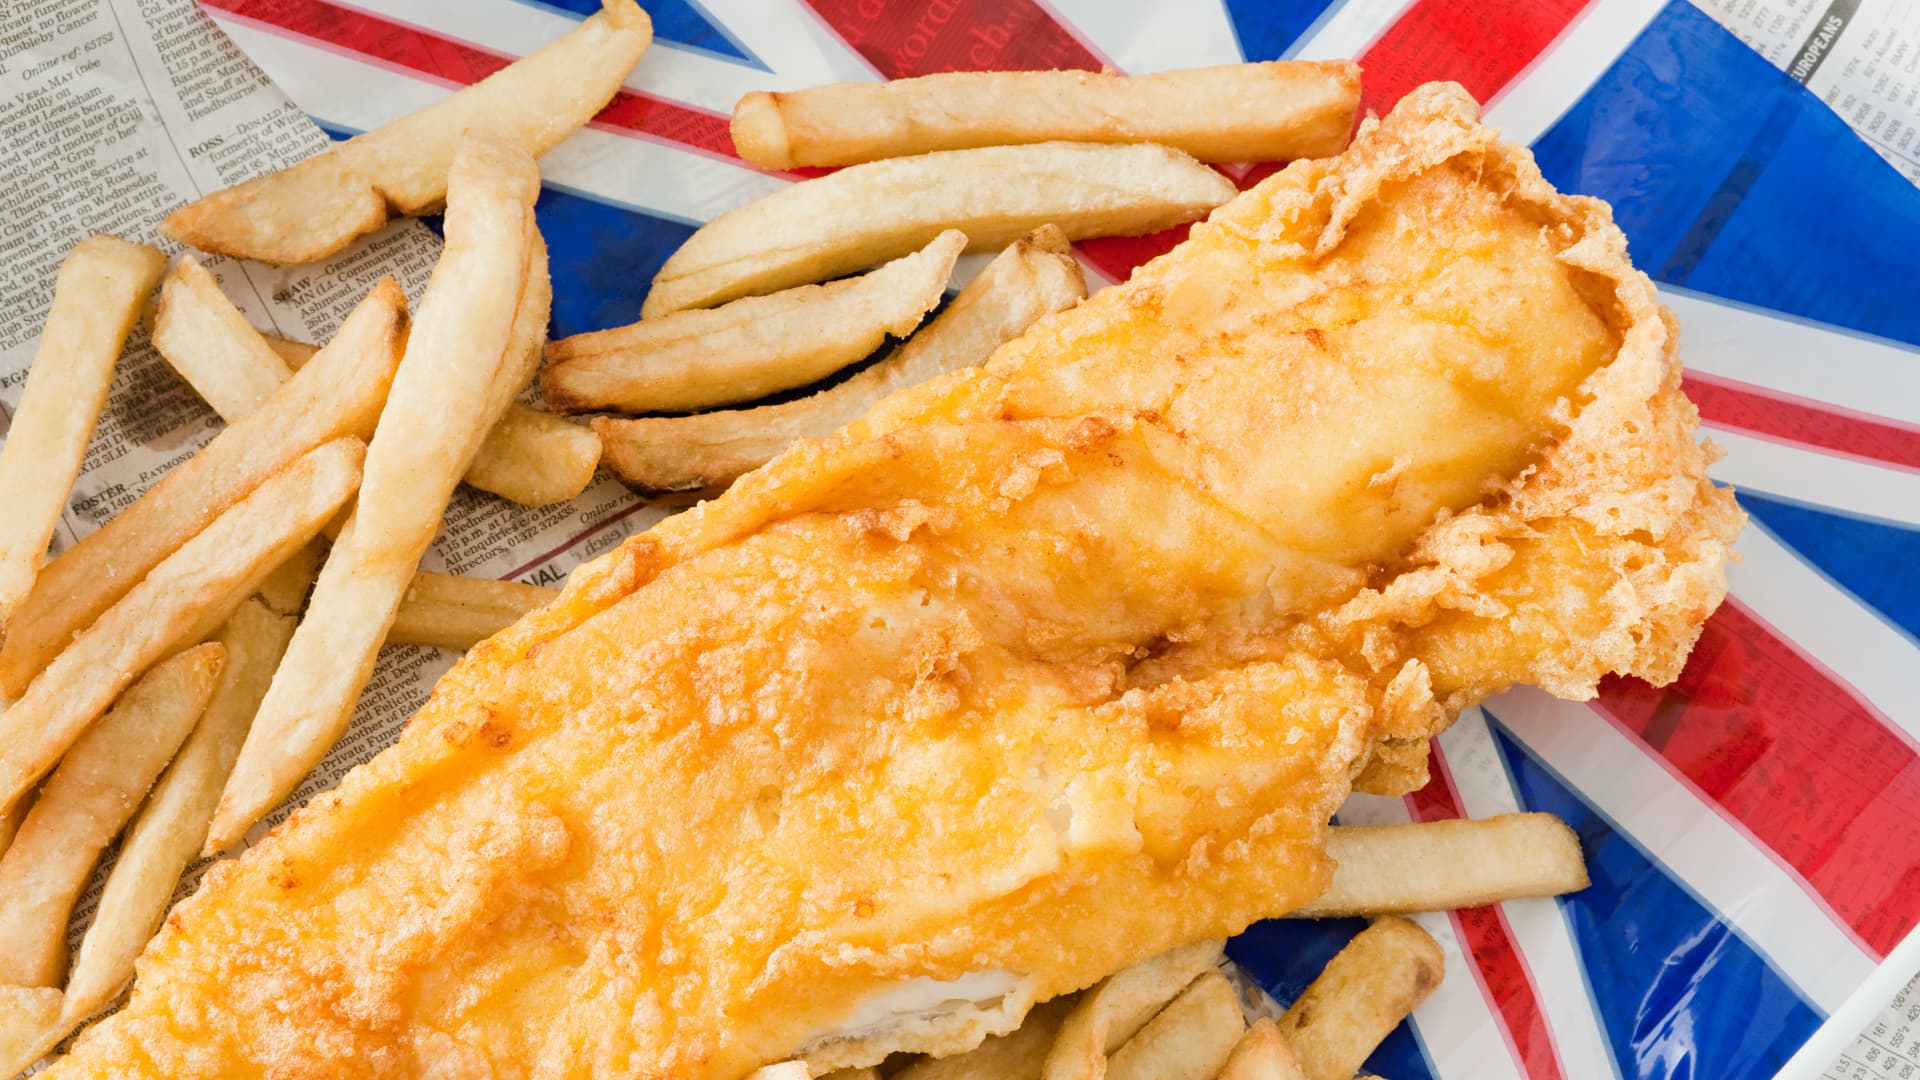 Fish and chip retailers anxiety for survival as strength, prices surge